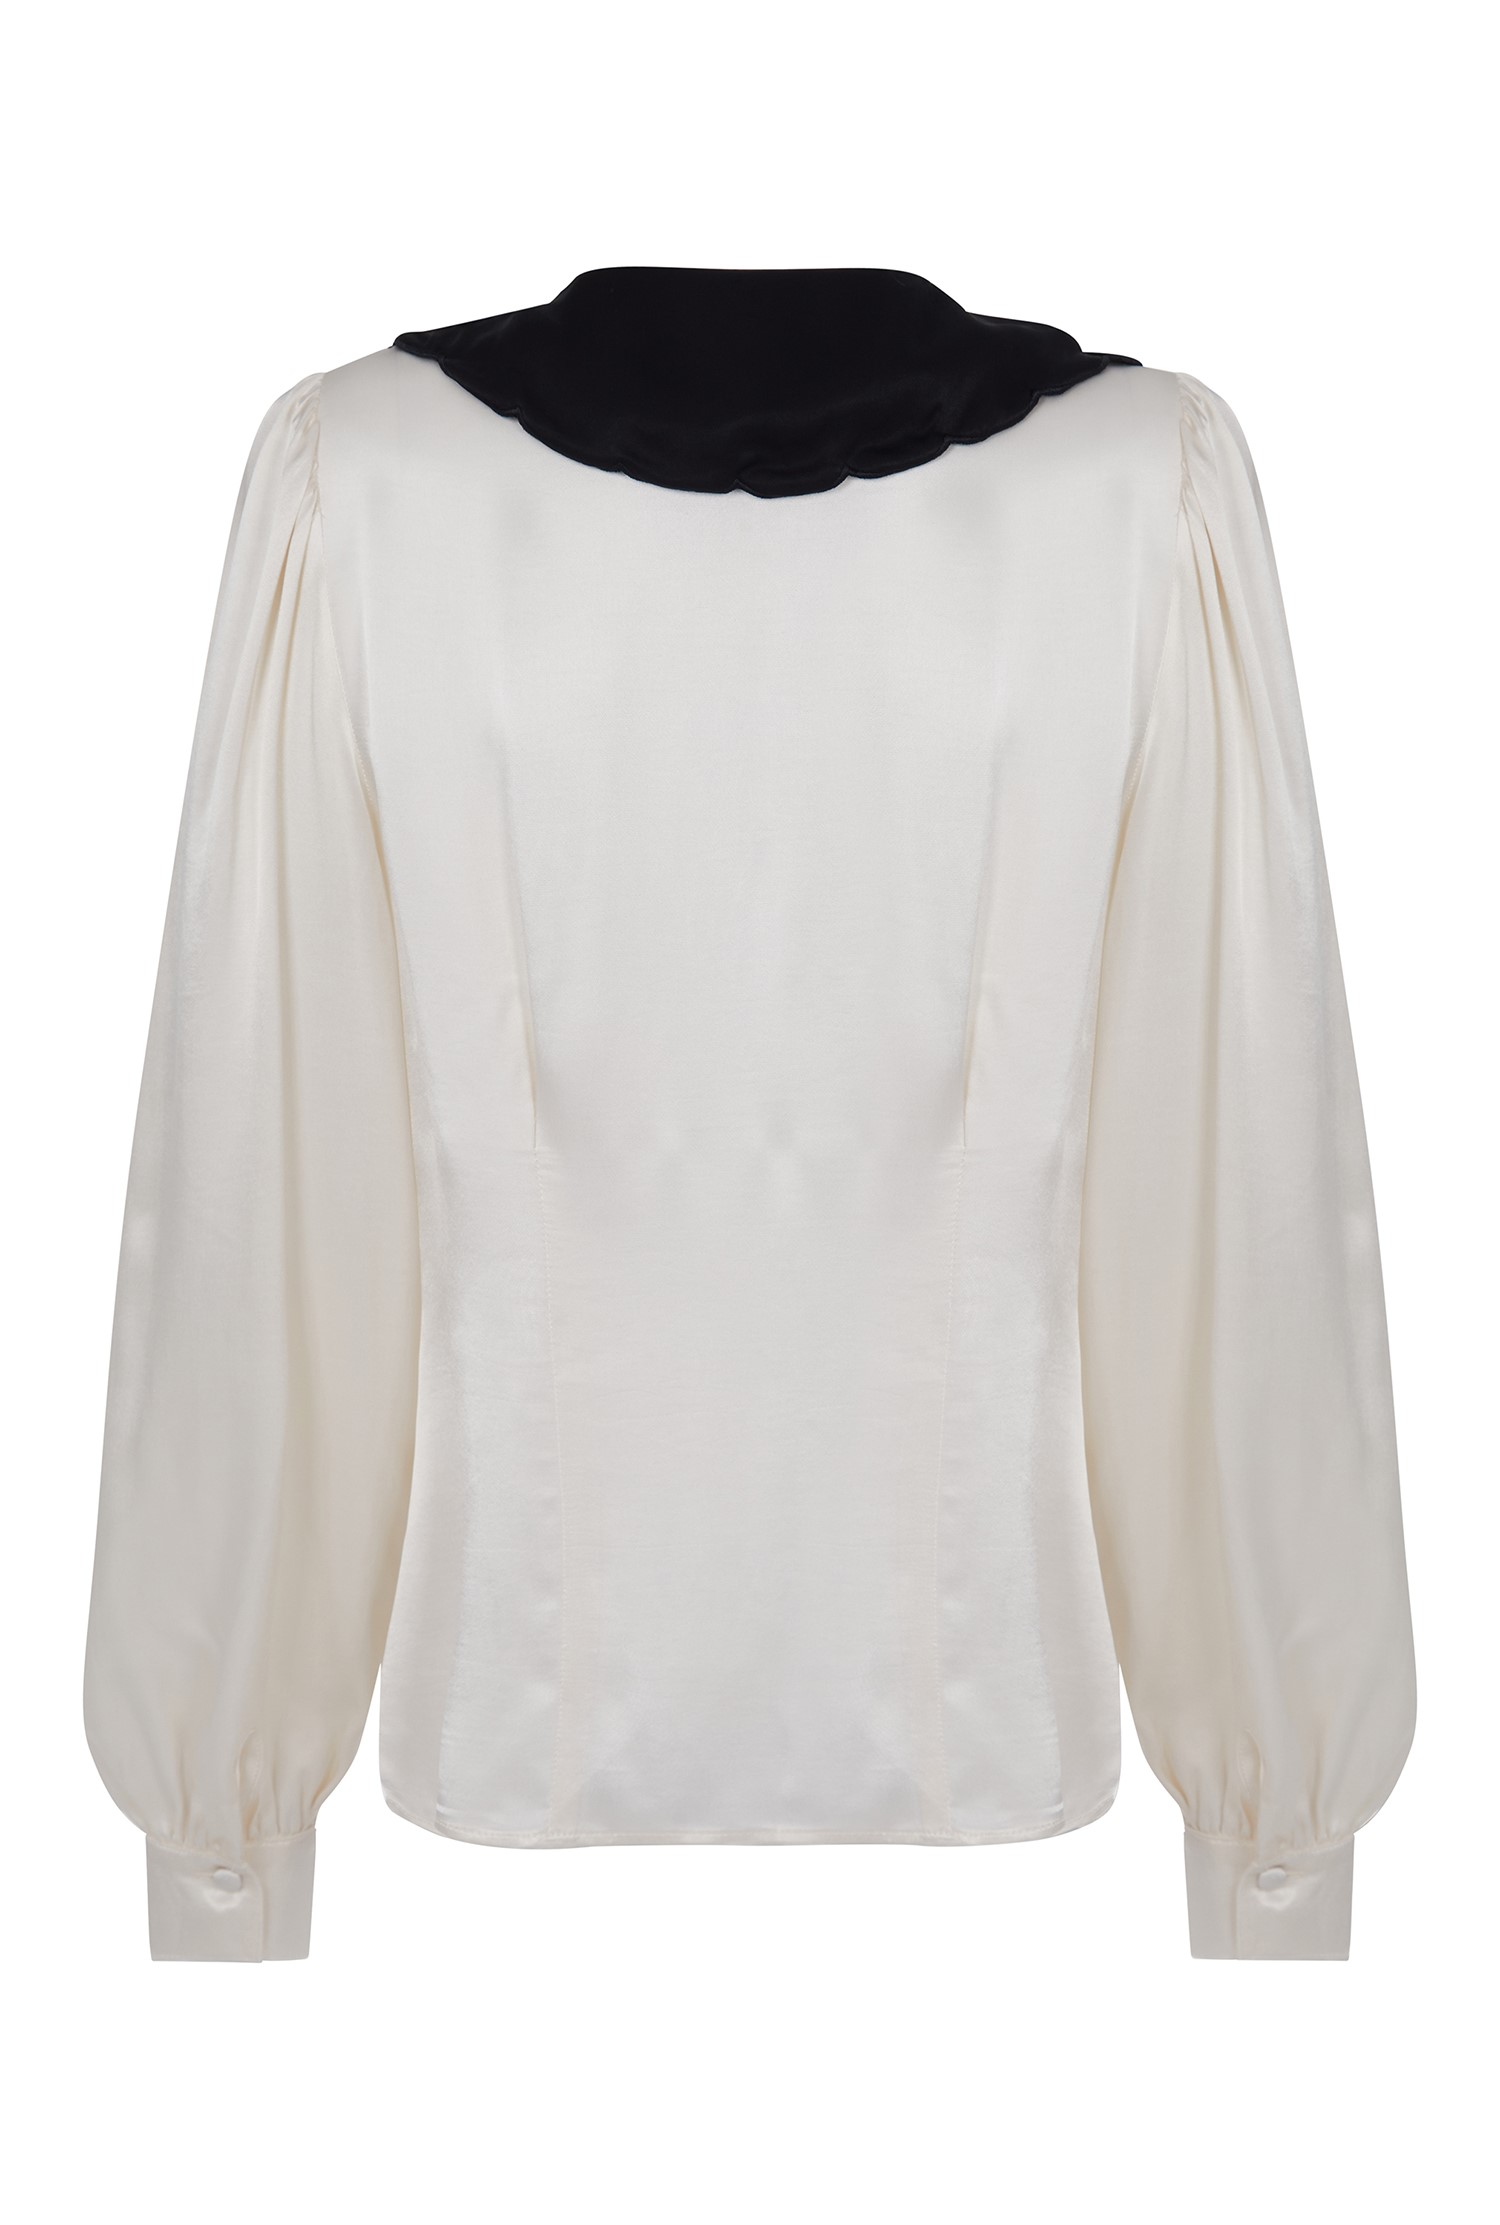 Boo Blouse | Ghost London